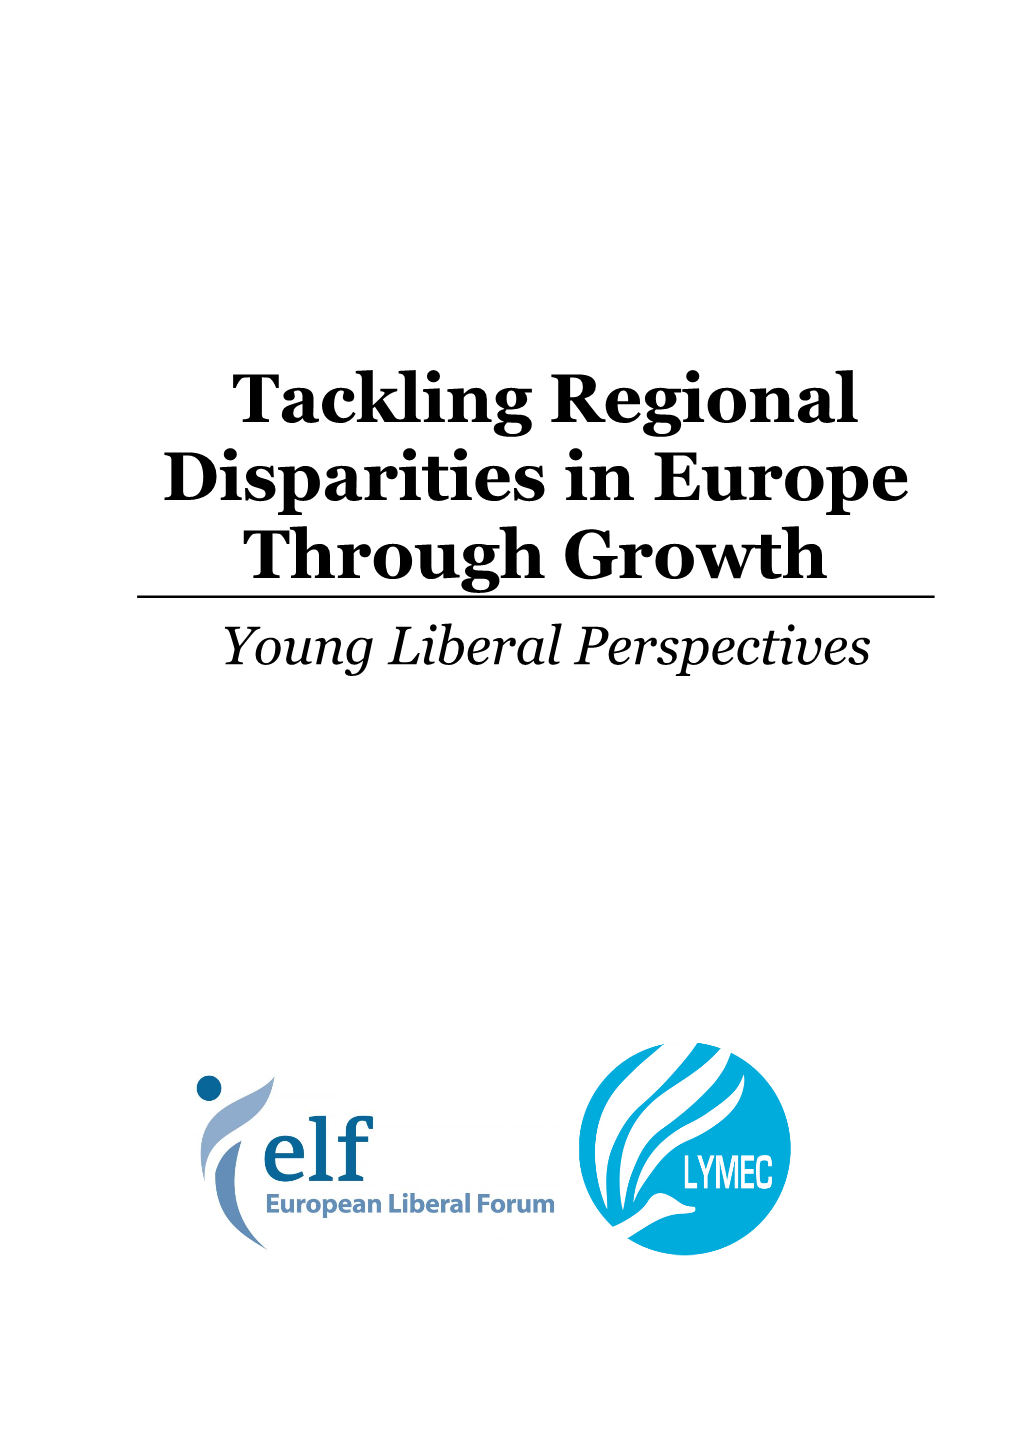 Tackling Regional Disparities in Europe Through Growth Young Liberal Perspectives Ii AUTHORS